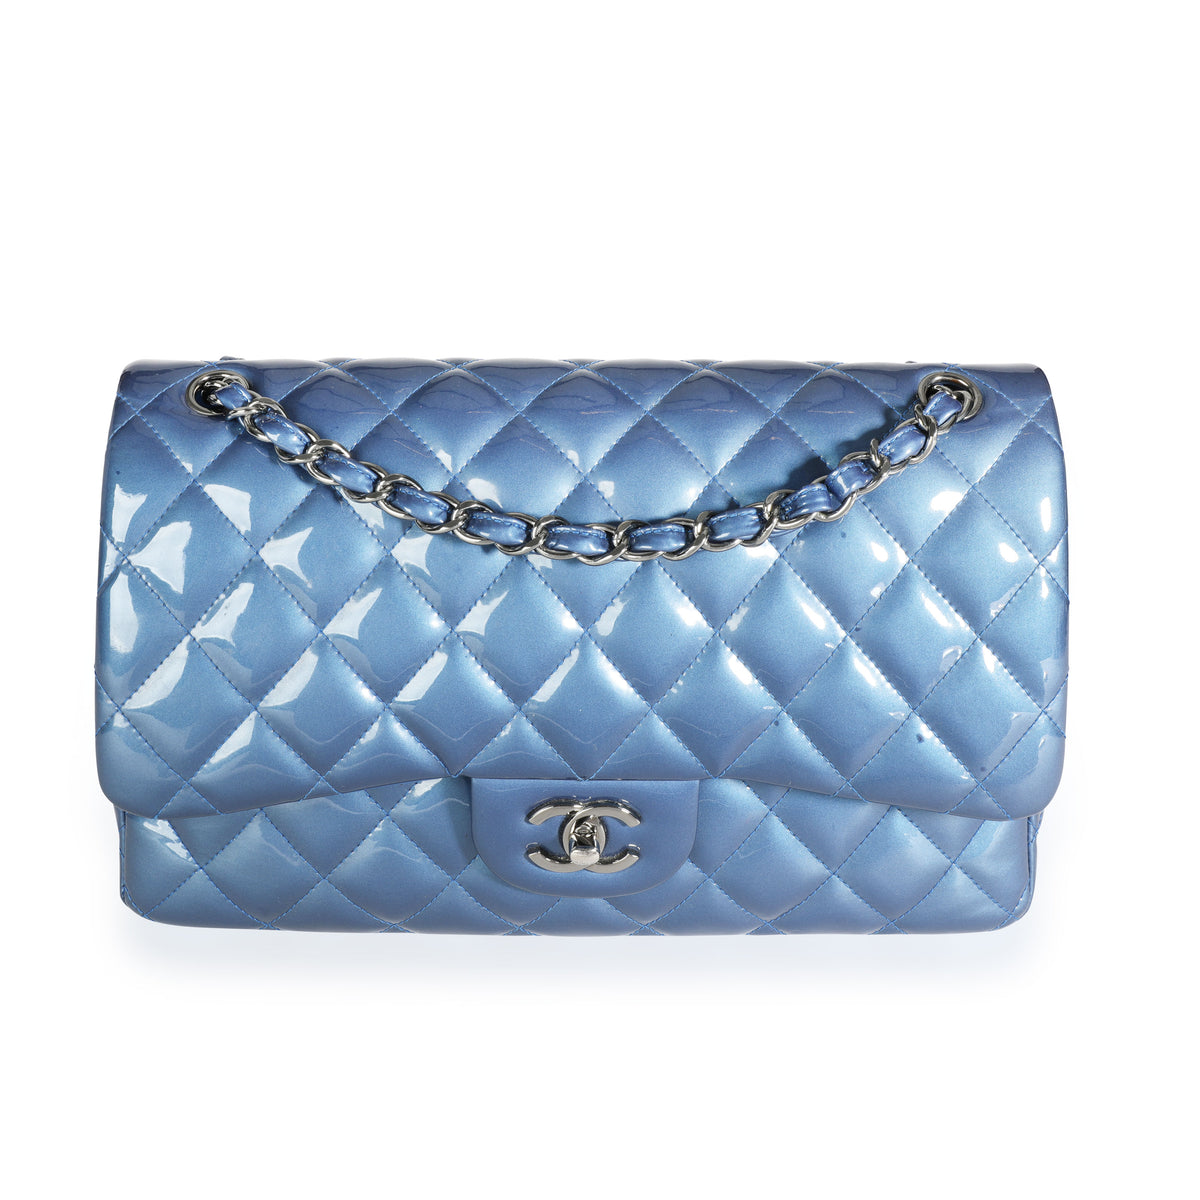 Chanel Blue Quilted Patent Leather New Medium Plexiglass Boy Bag